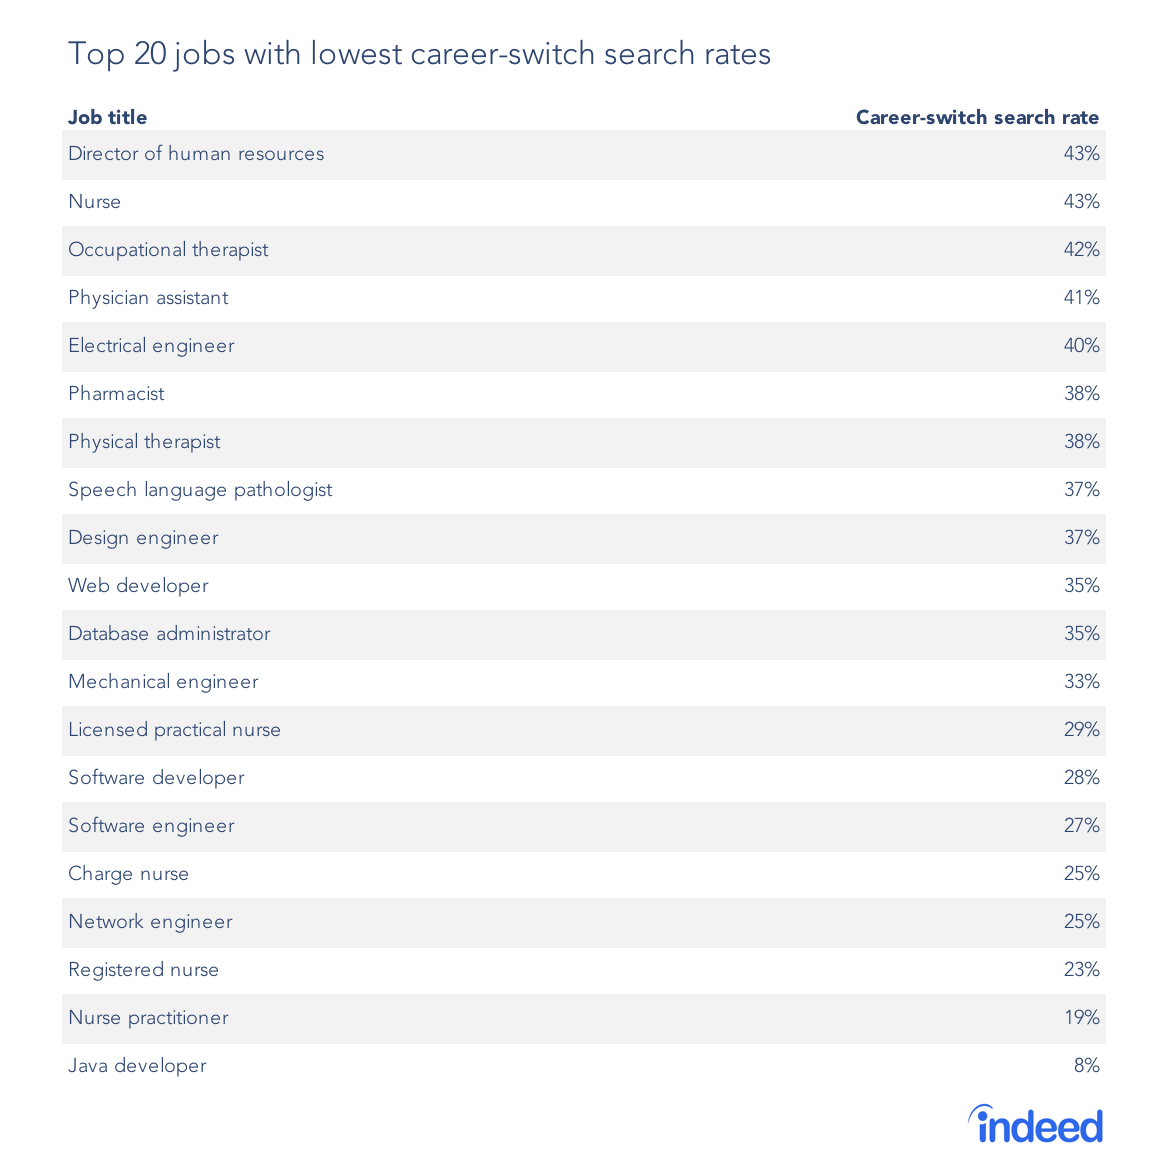 Table shows top 20 jobs with lowest career-switch search rates.